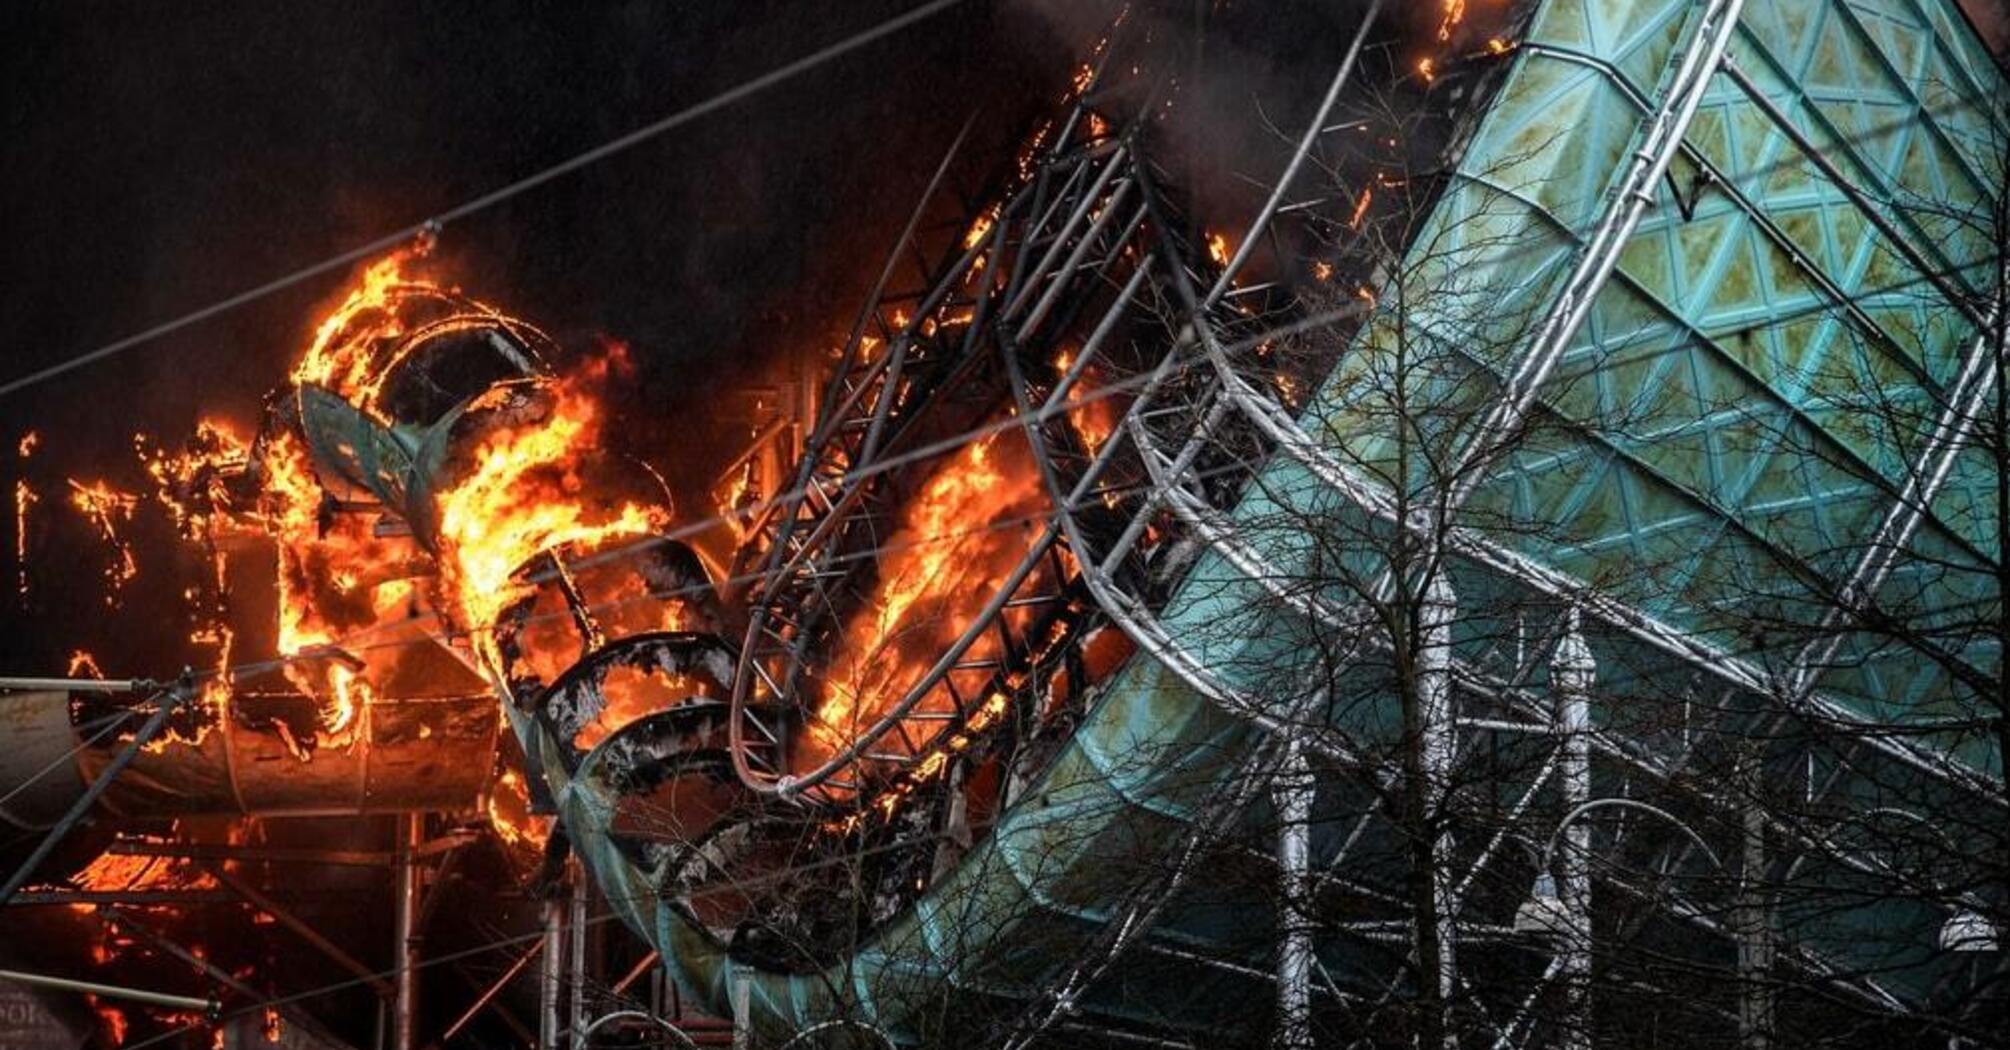 A large-scale fire broke out in Sweden's largest amusement park